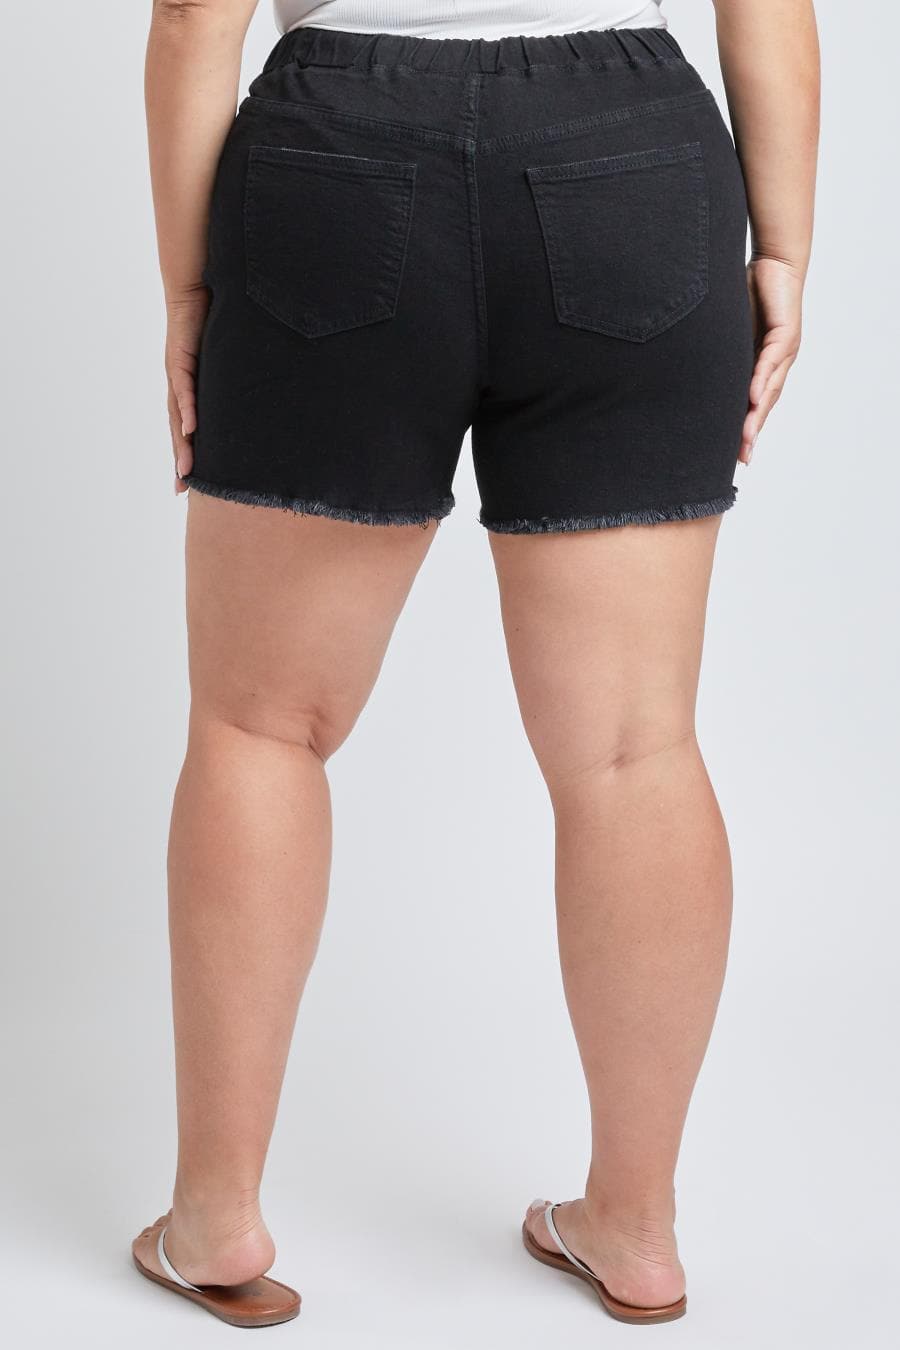 GeeGee Plus Size Athletic Jogger Shorts